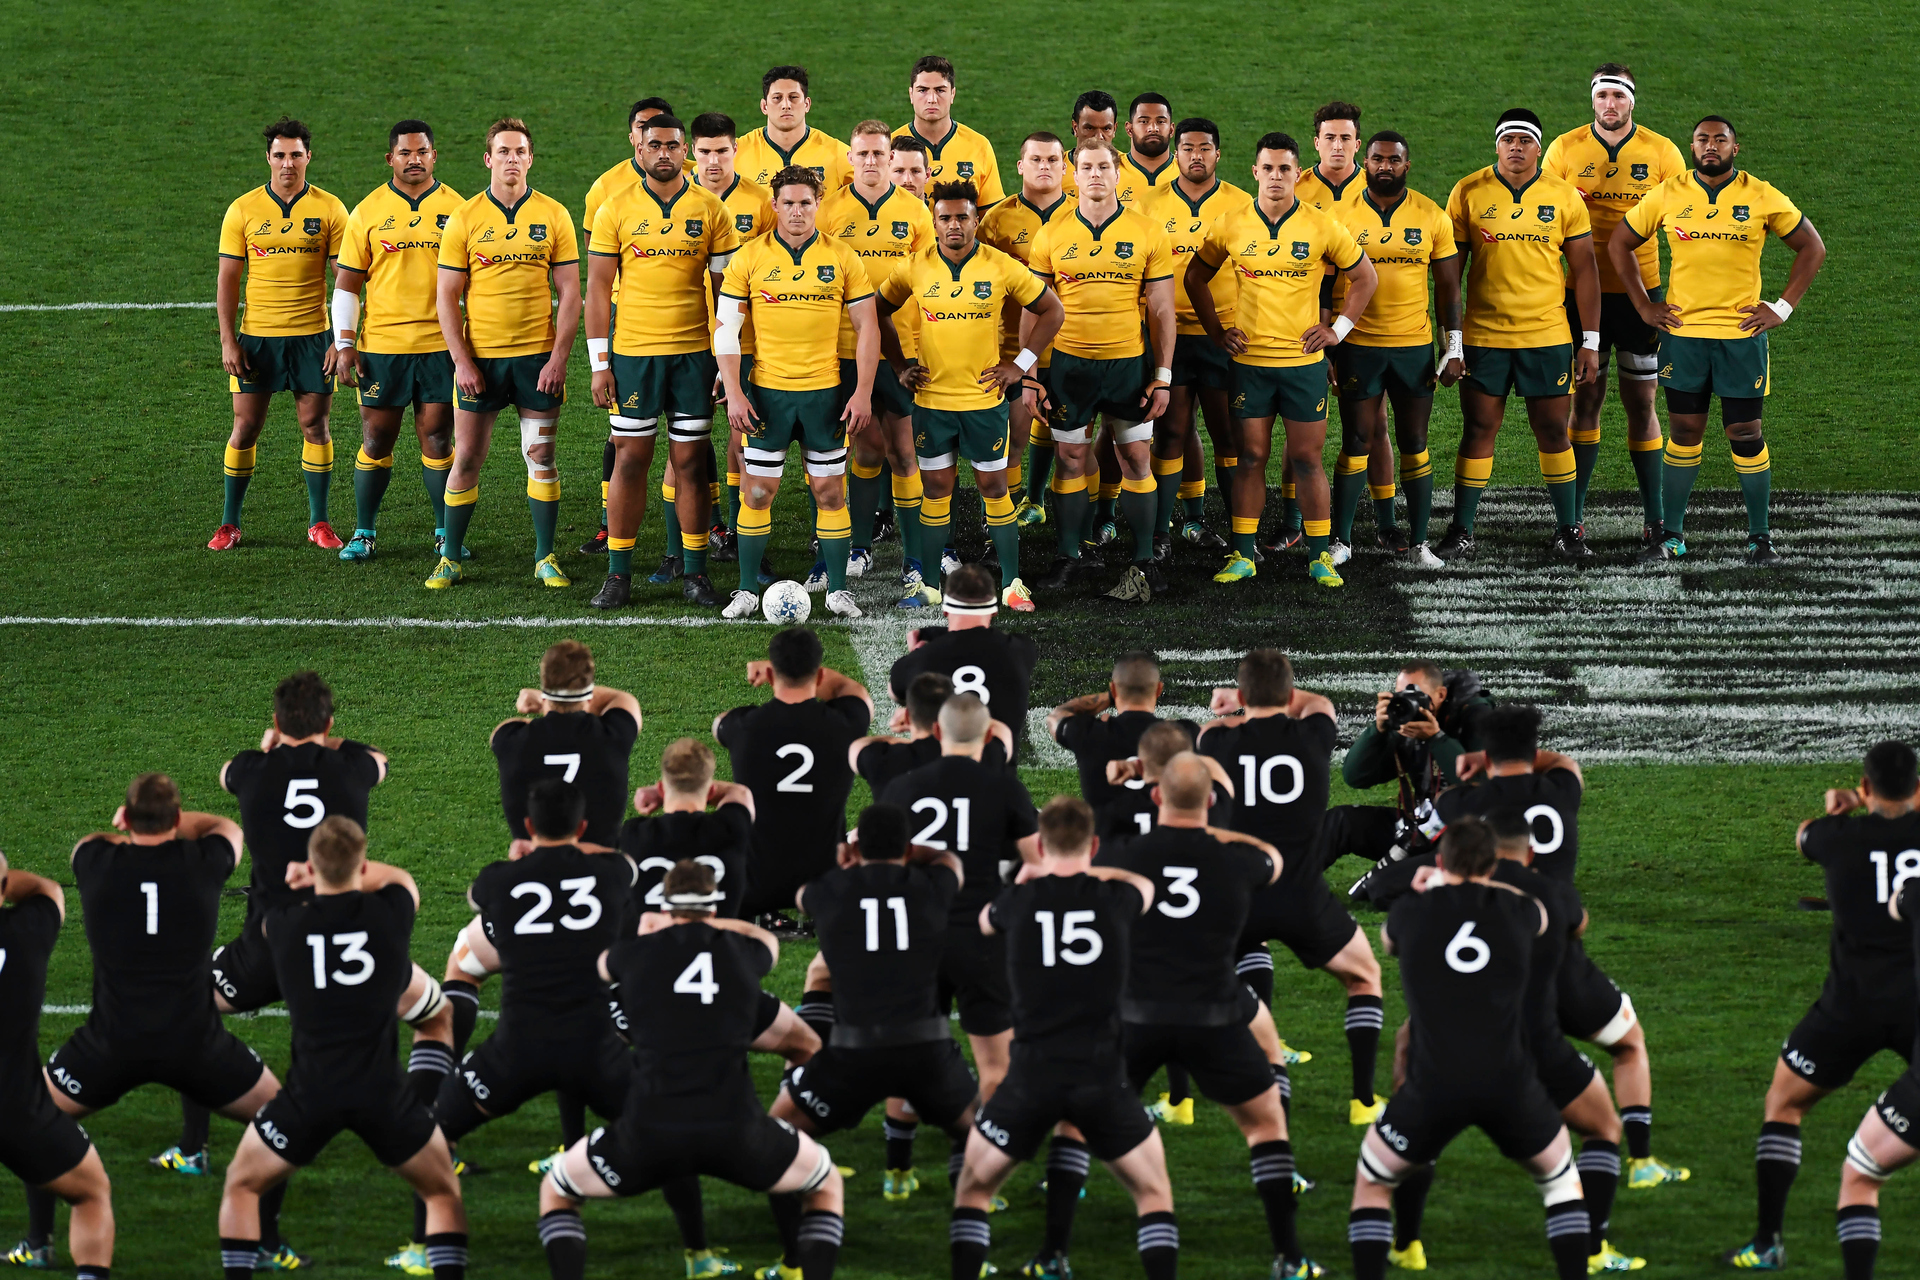 Bledisloe Cup rugby All Blacks v Australia Wallabies - teams, kick-off time, live streaming and how to watch